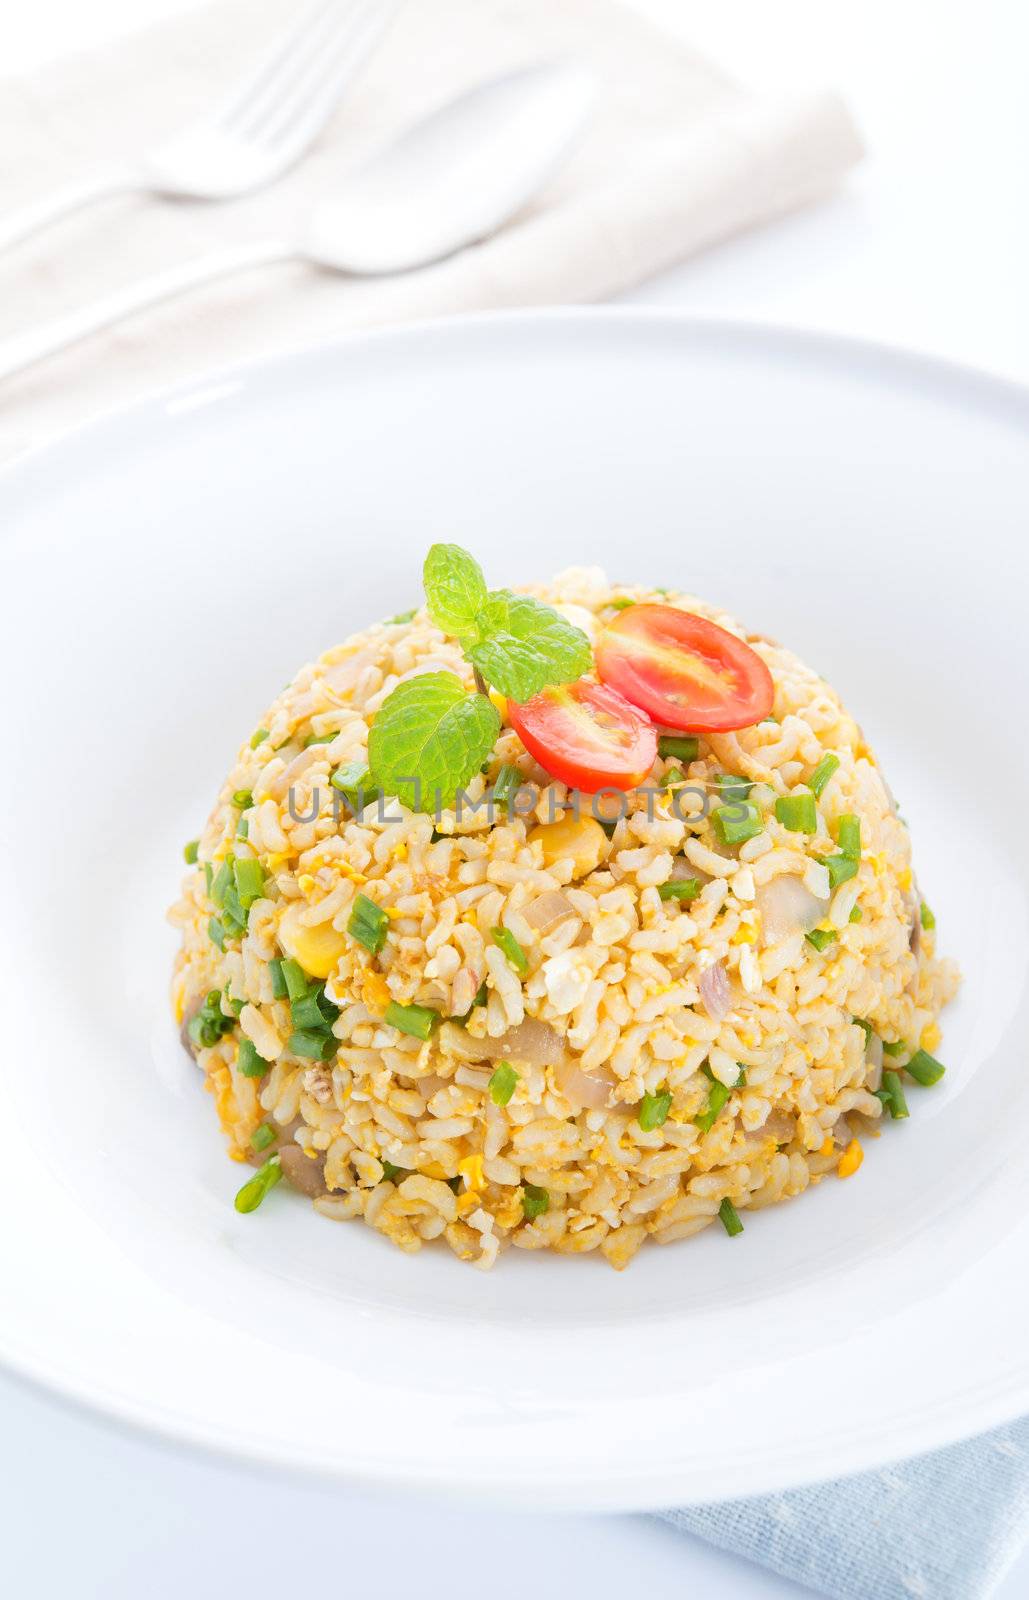 Asian Chinese egg fried rice by szefei